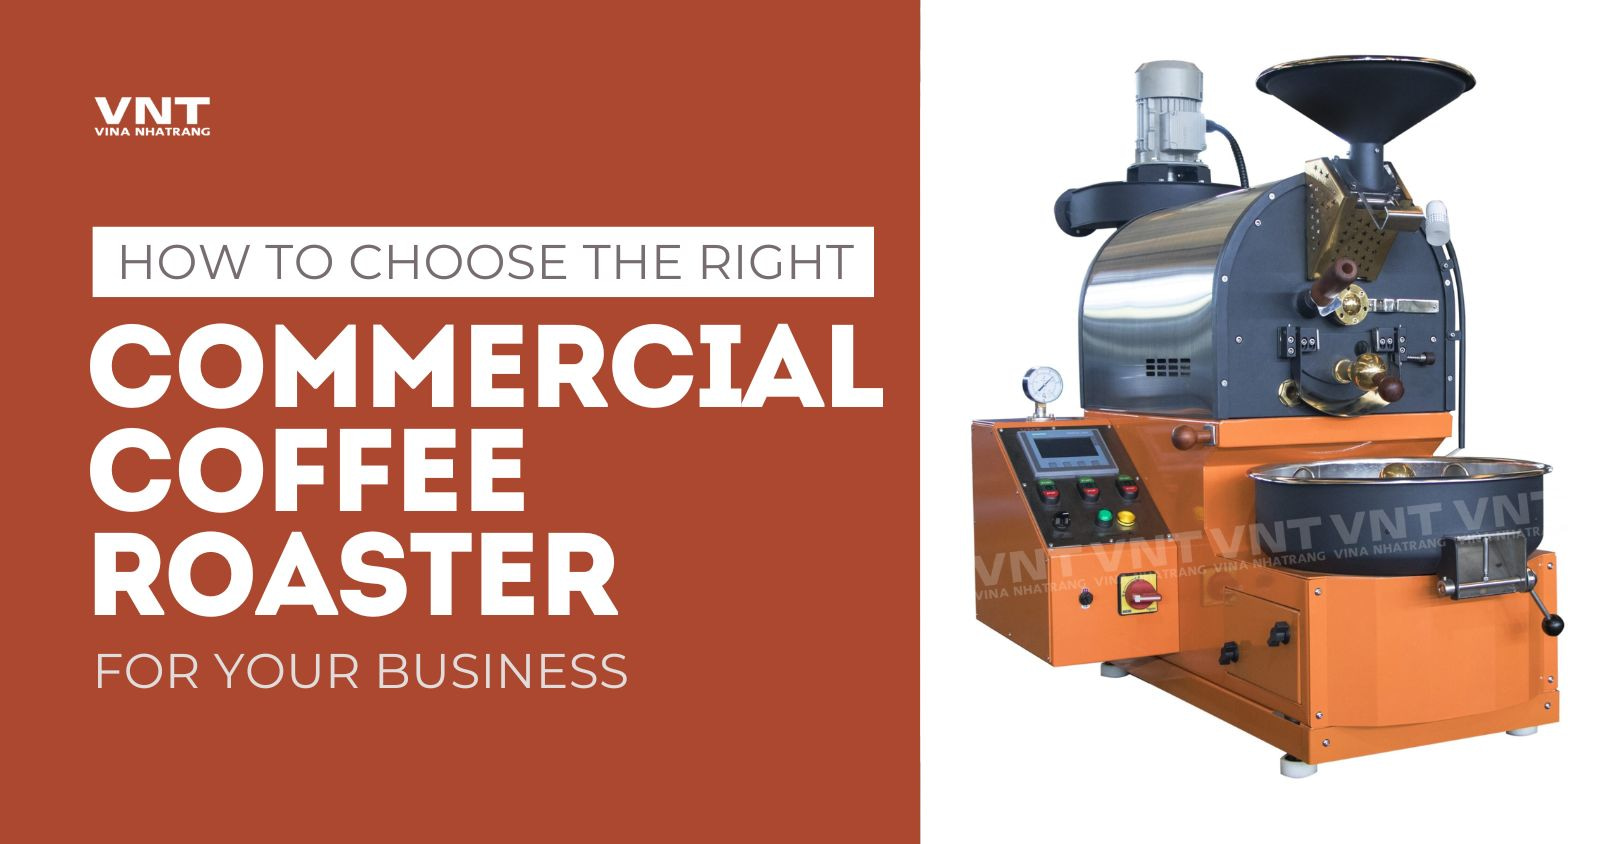 How to choose the Right Commercial Coffee Roaster